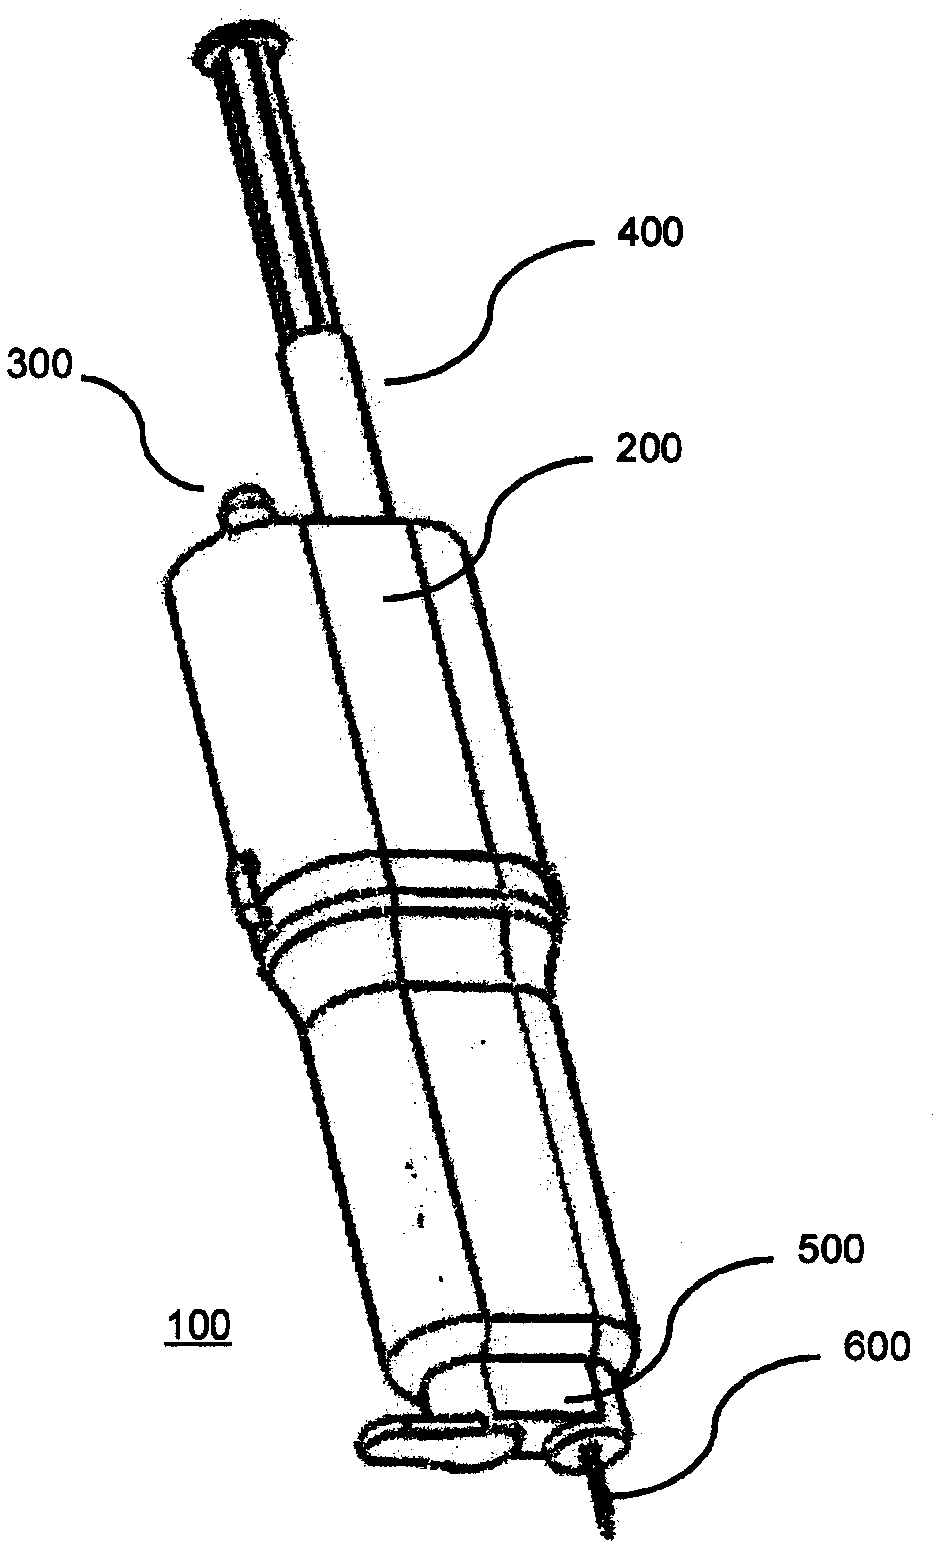 An injection and extraction ophthalmic device